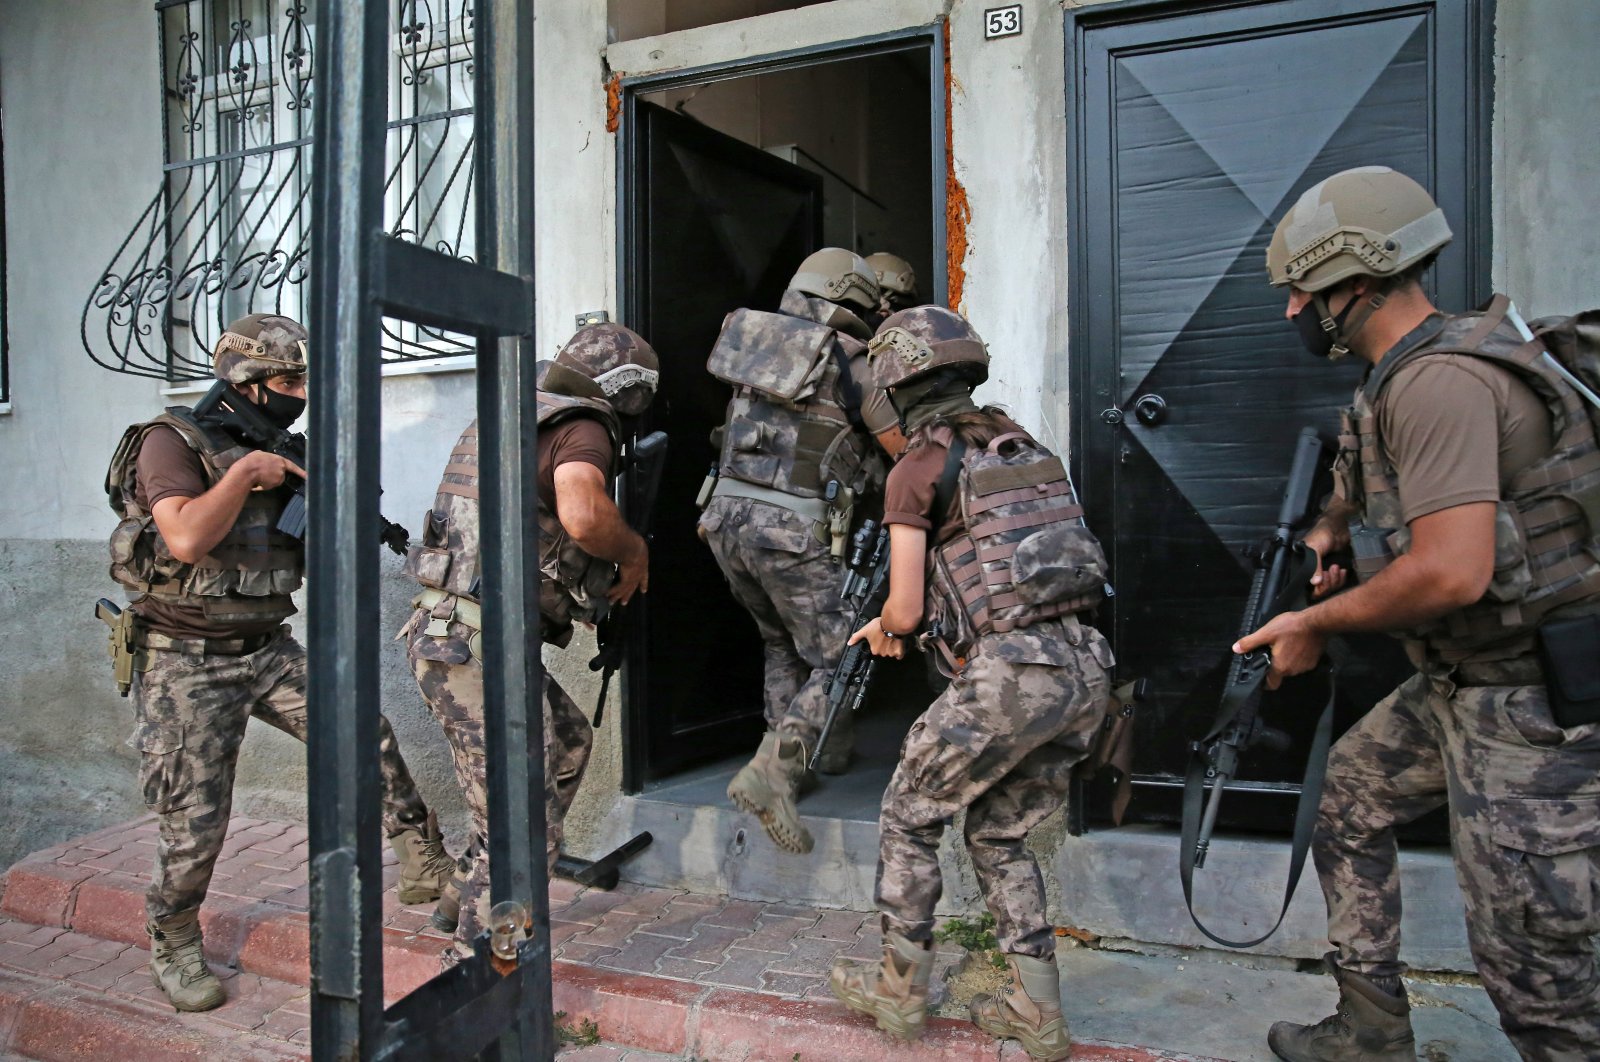 Police raid a building in a counternarcotics operation in Adana, Turkey, July 7, 2020. (AA Photo)